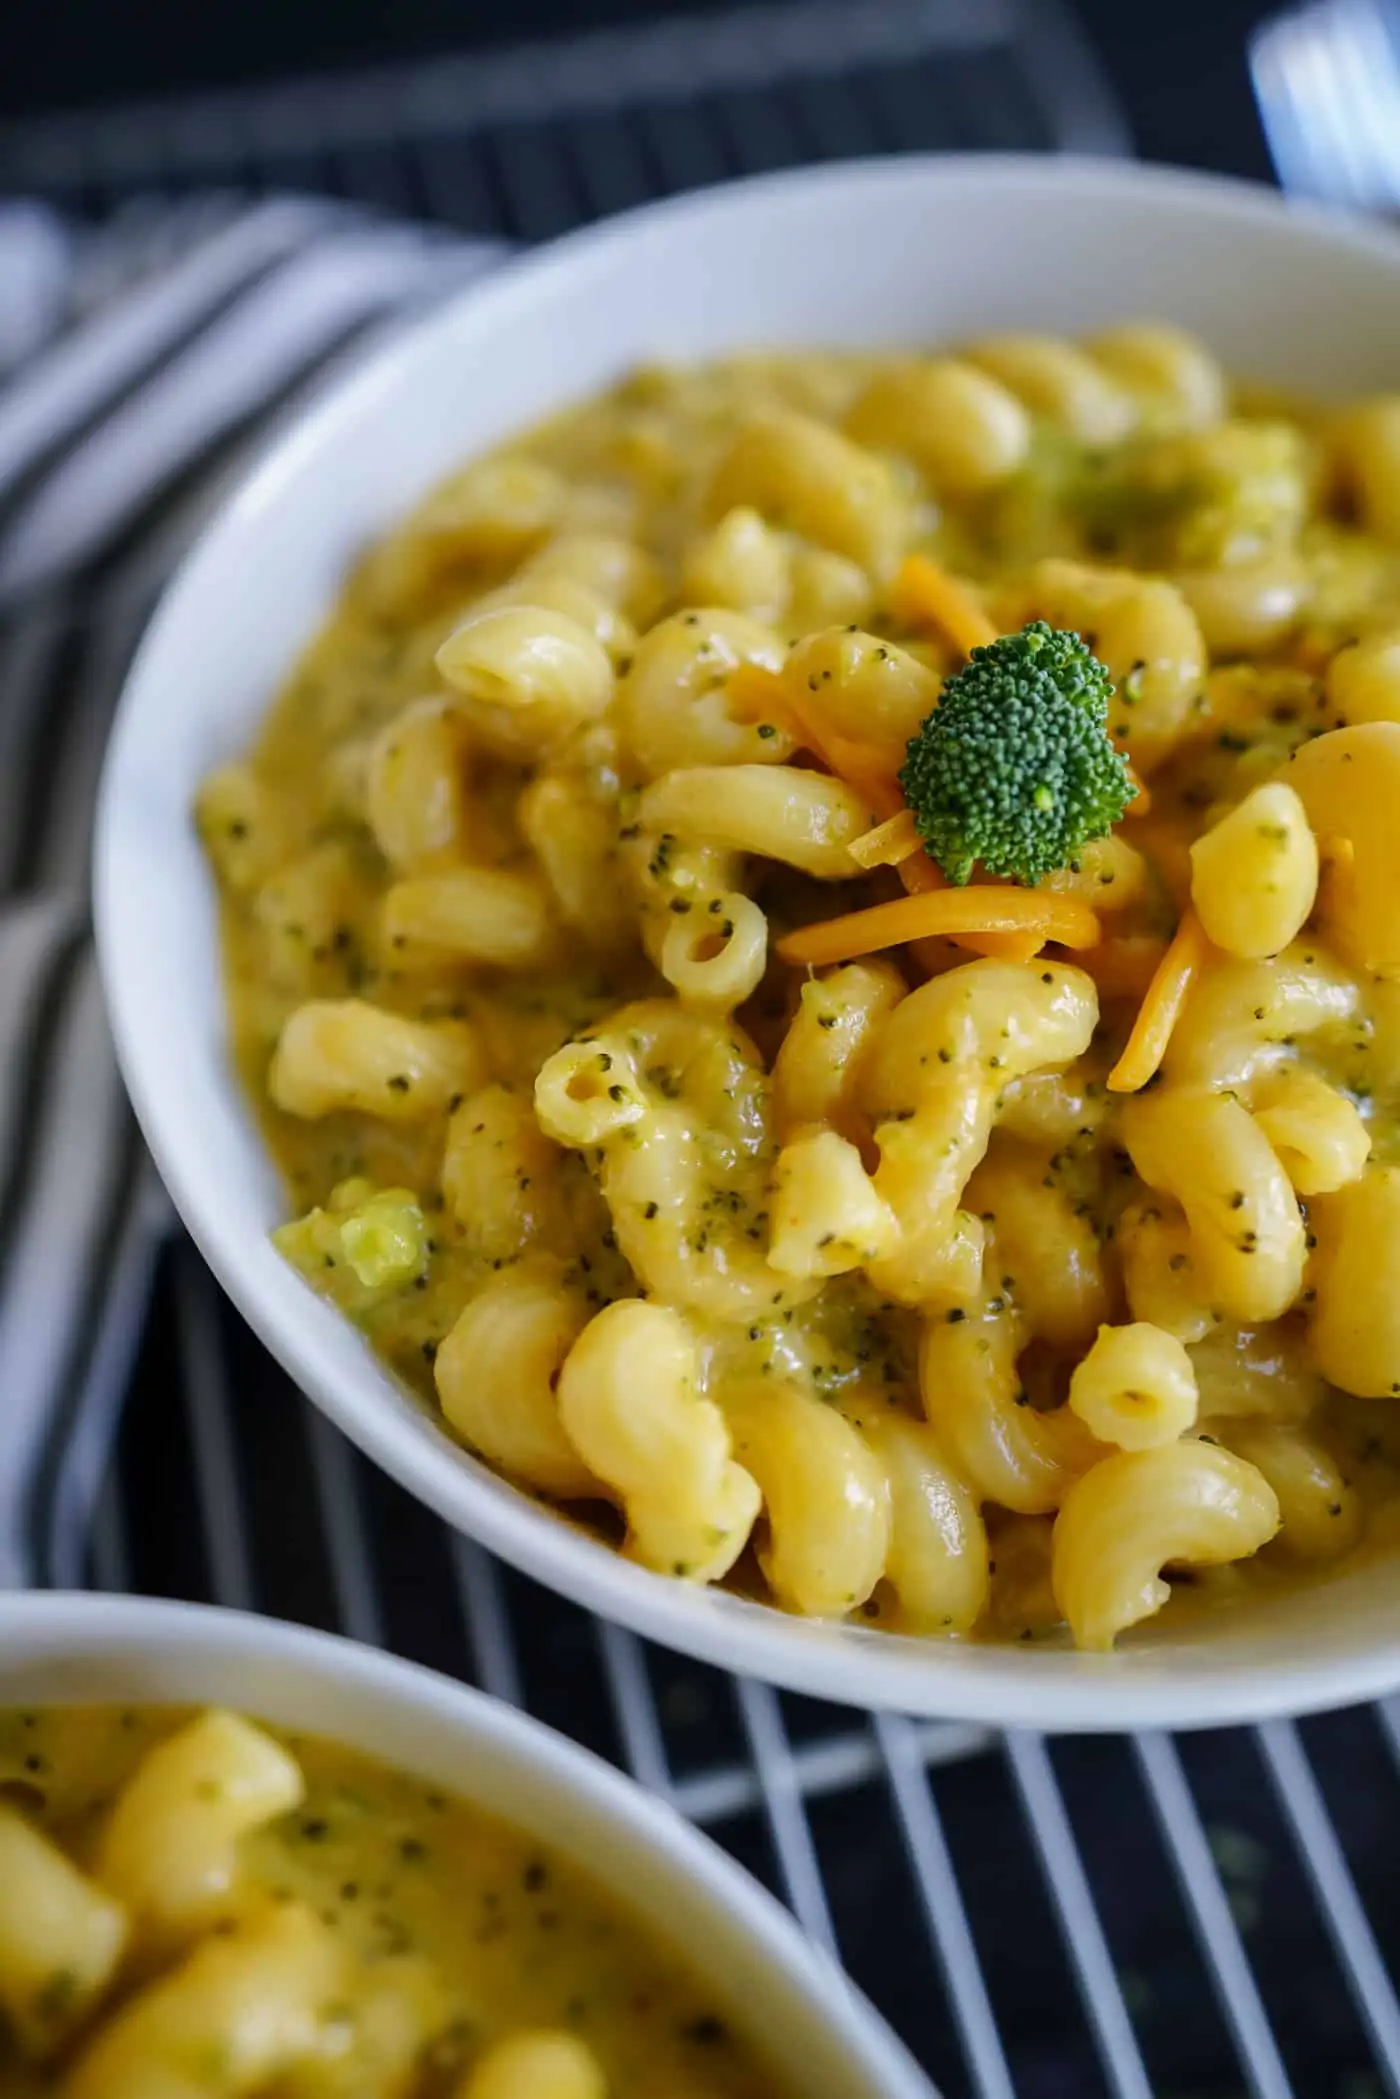 A Lily Love Affair shares a recipe for a large white bowl of broccoli mac and cheese